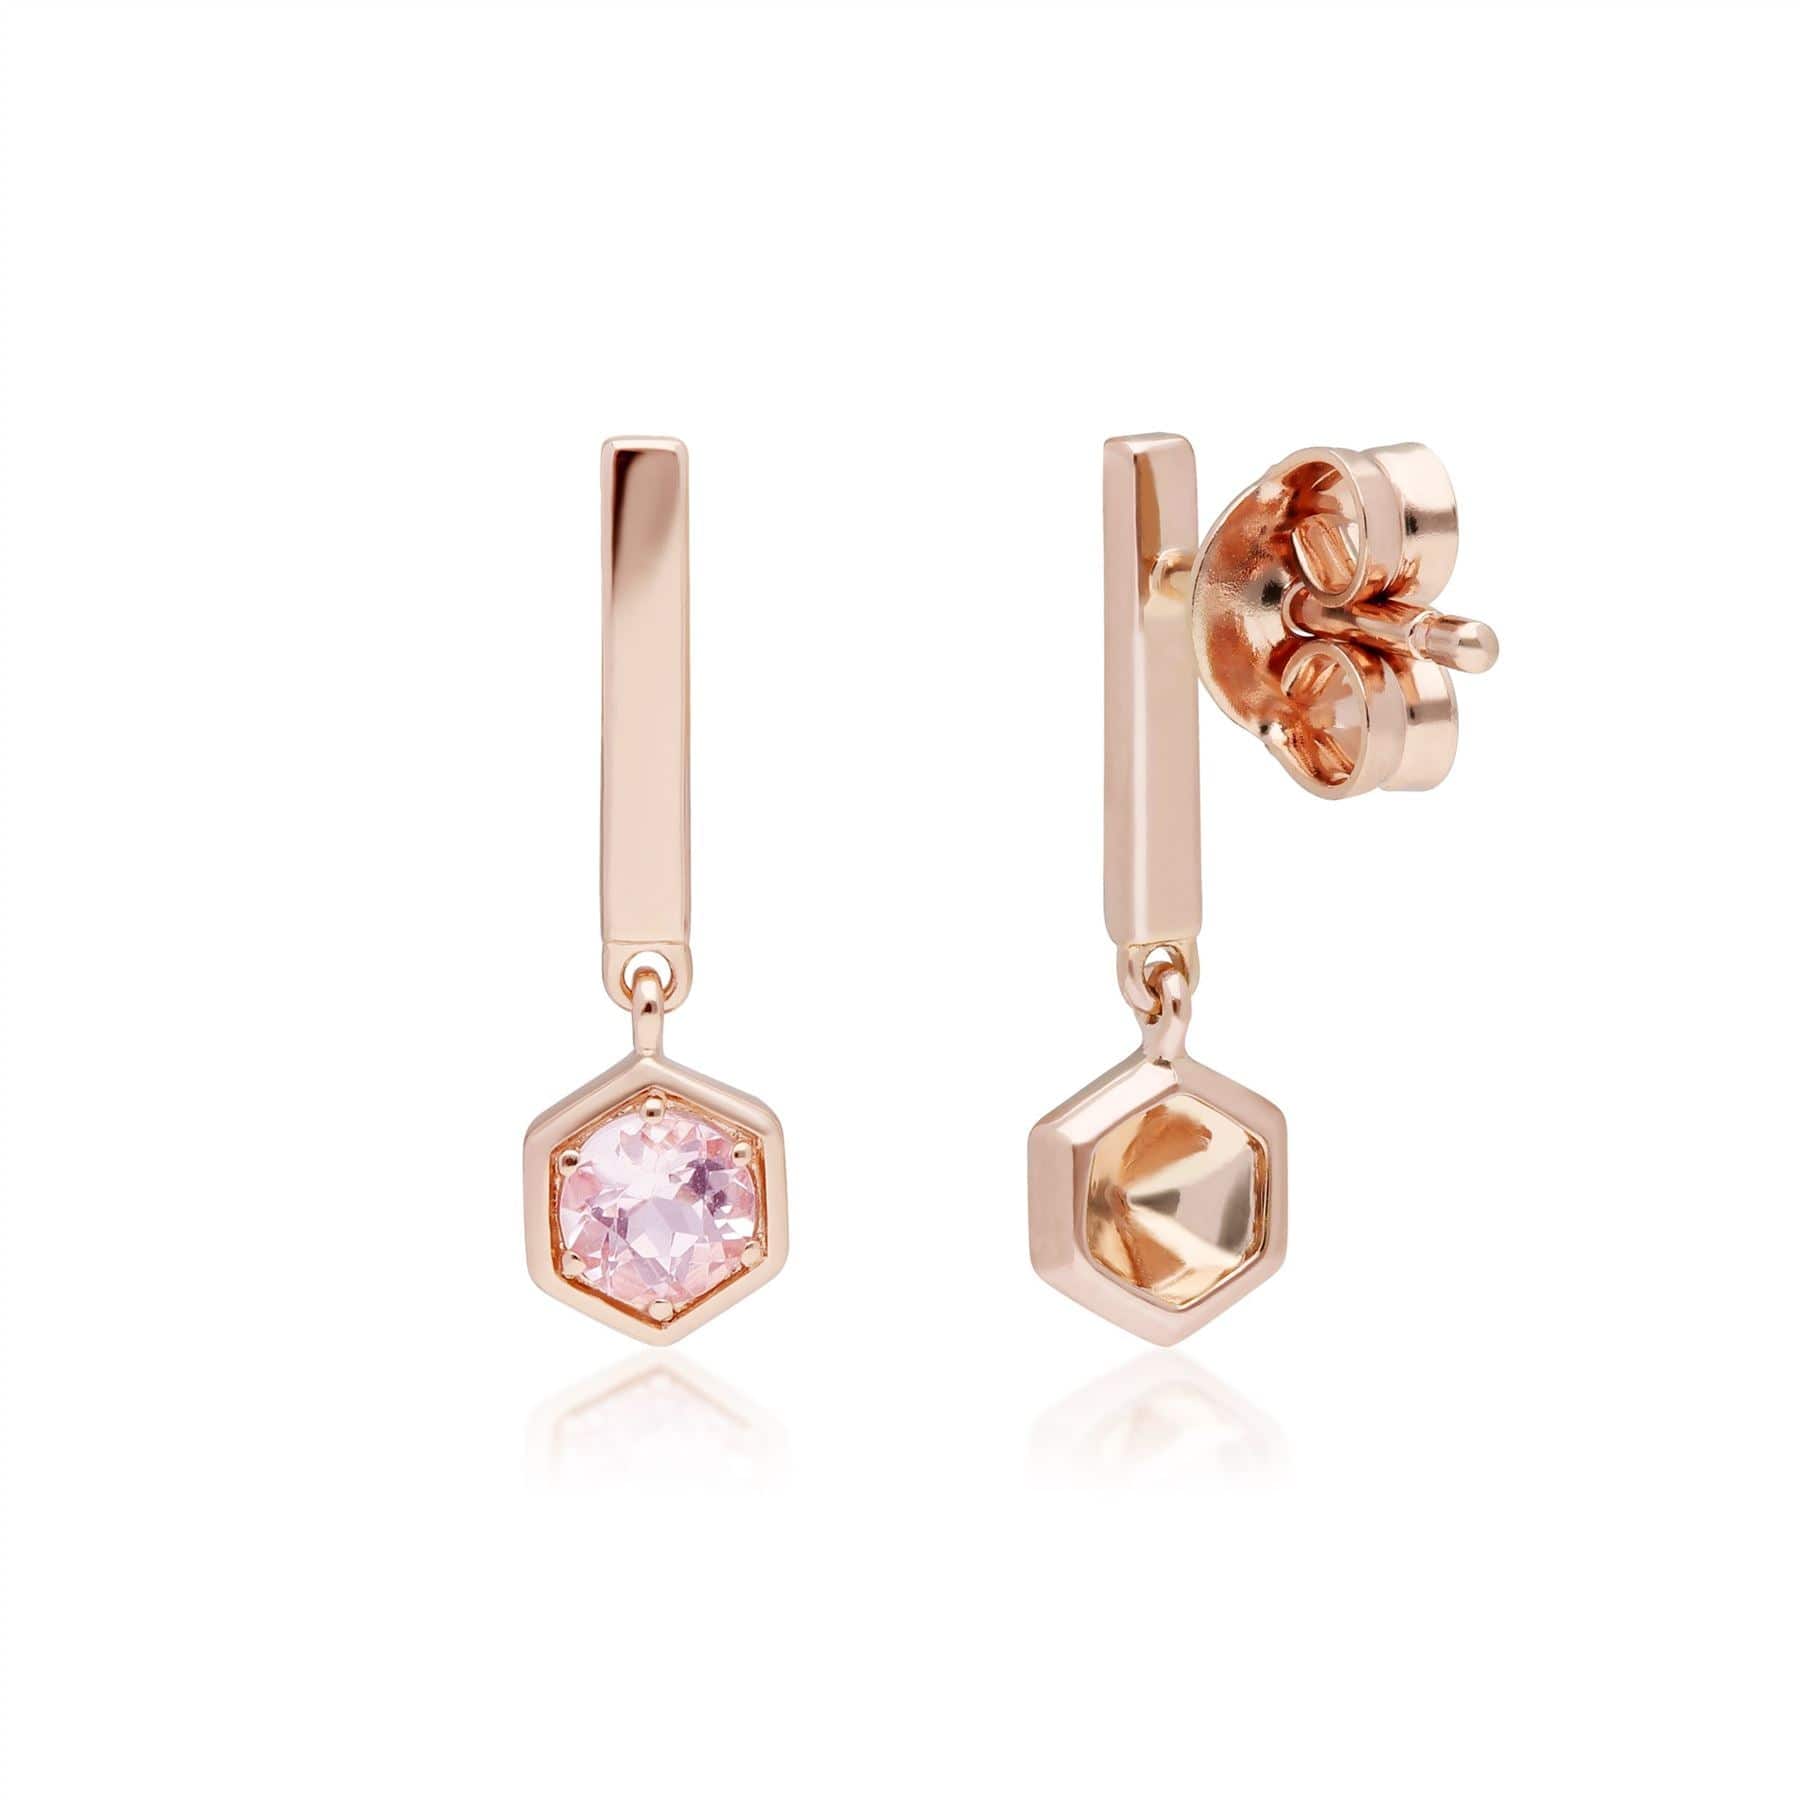 135E1637019 Micro Statement Mismatched Morganite & Diamond Drop Earrings in 9ct Rose Gold 5